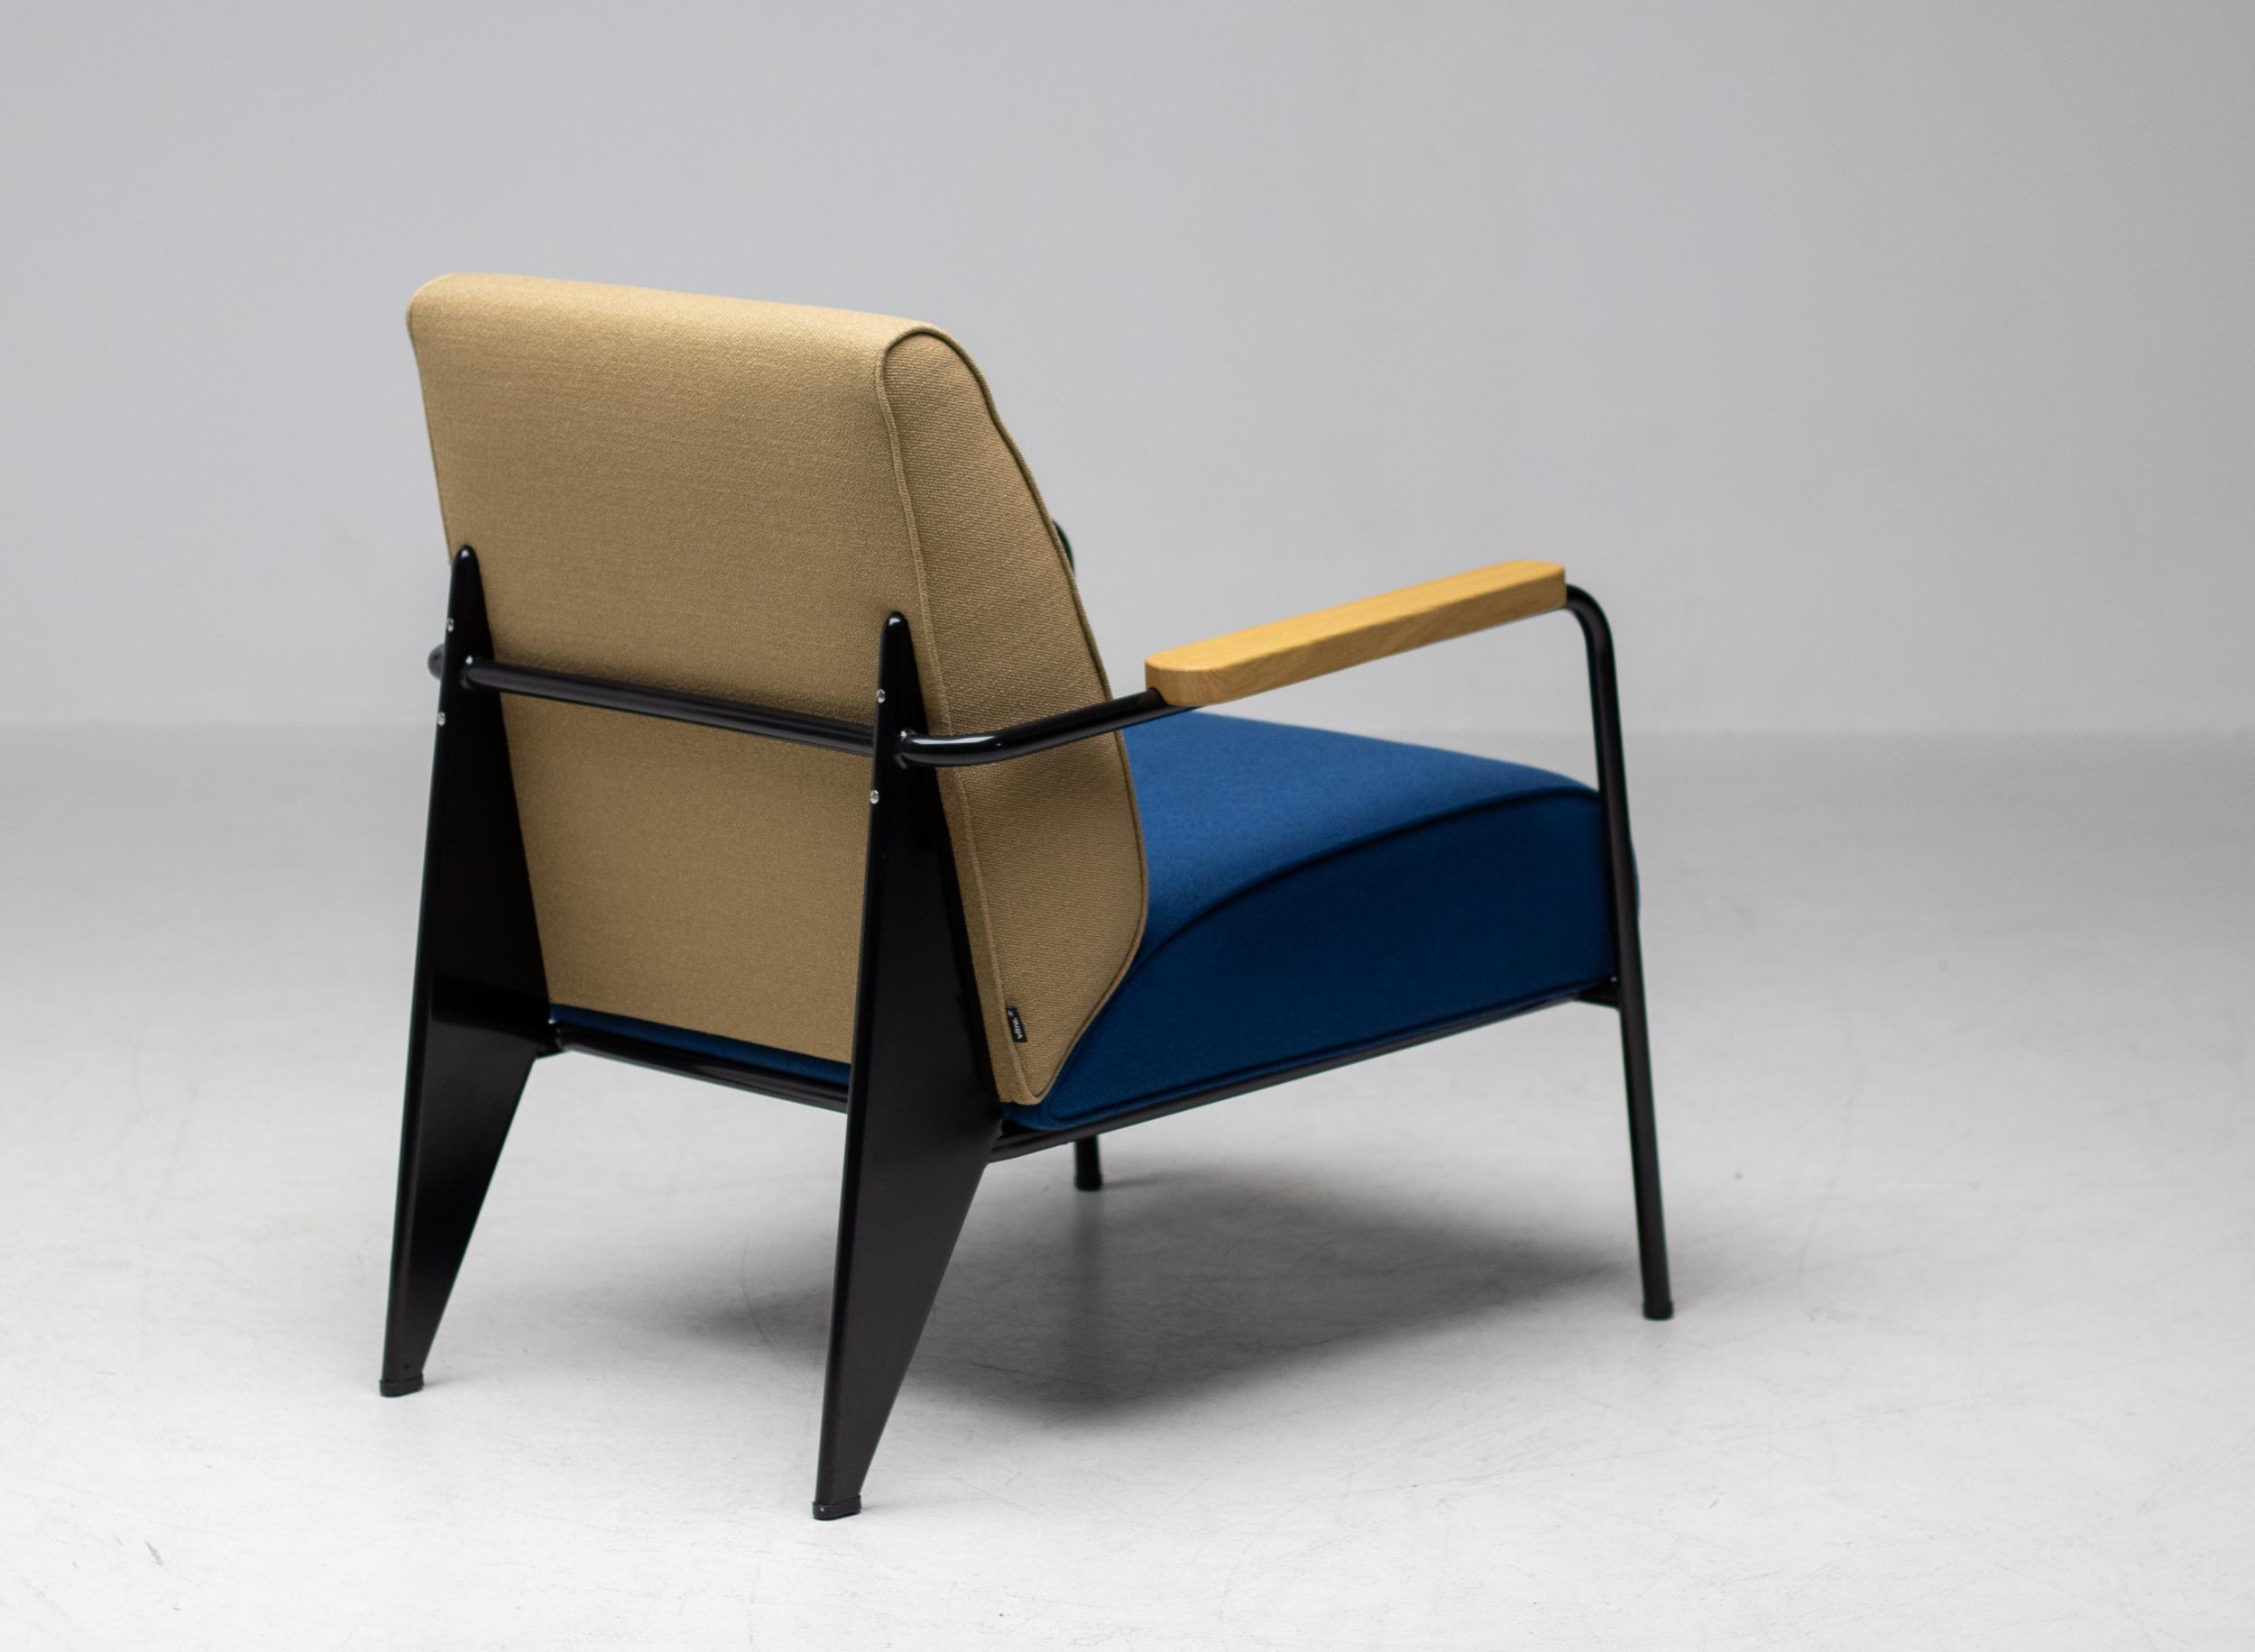 Limited edition Fauteuil de Salon, designed by Jean Prouvé in 1939.
Made by Vitra in 2018, in beautiful cream and blue fabric with black enameled frame and oak armrests. 
This configuration was a special order for the reception area of a large